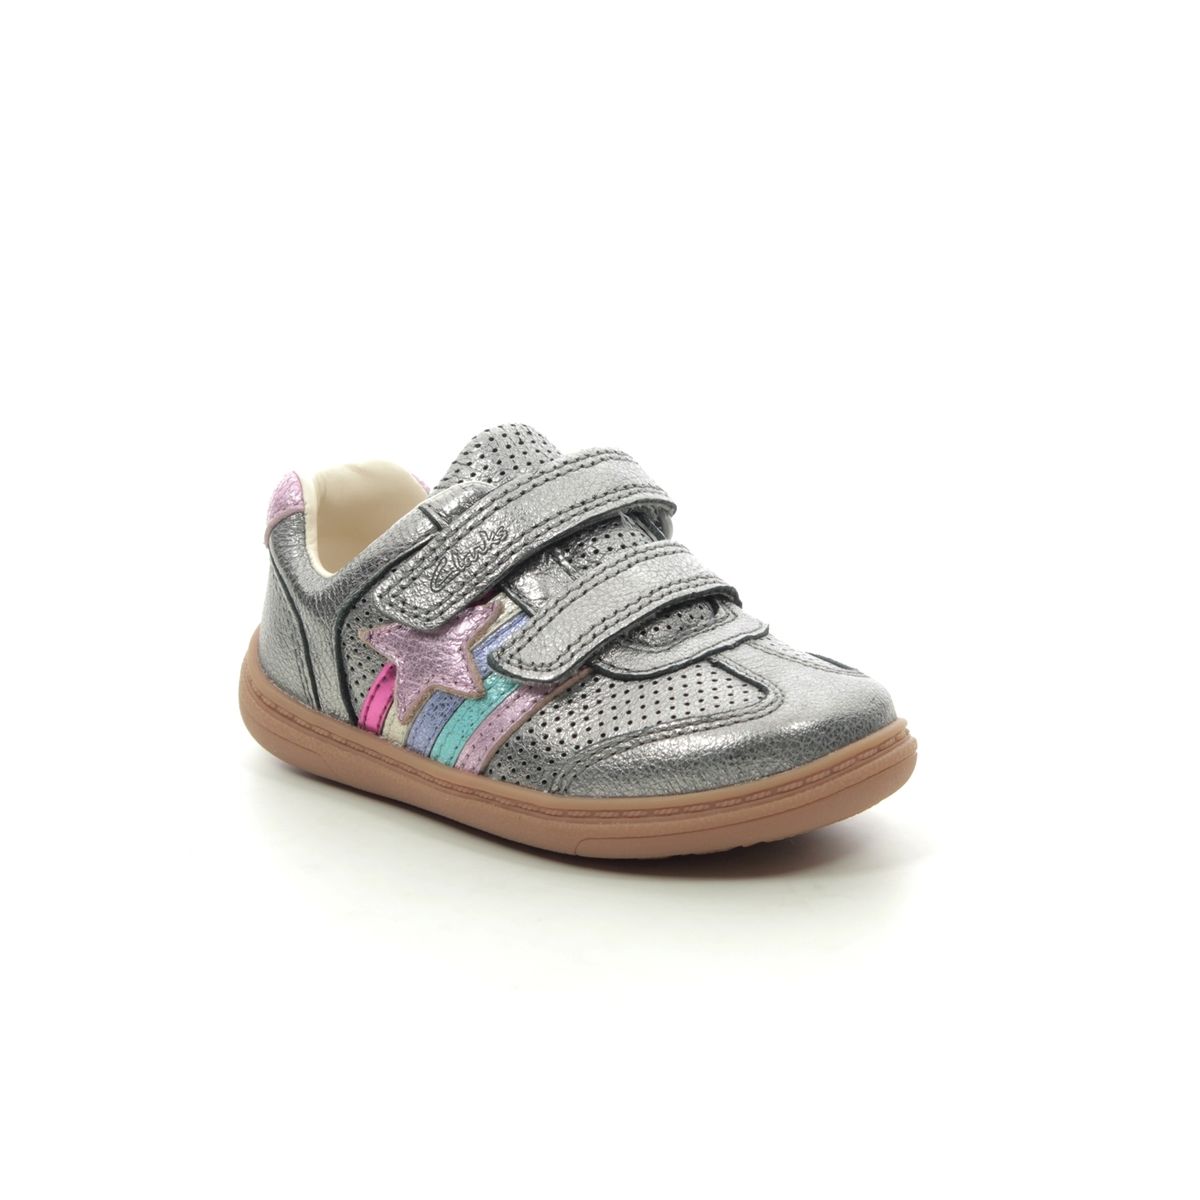 Clarks Flash Bright T Girls First Shoes